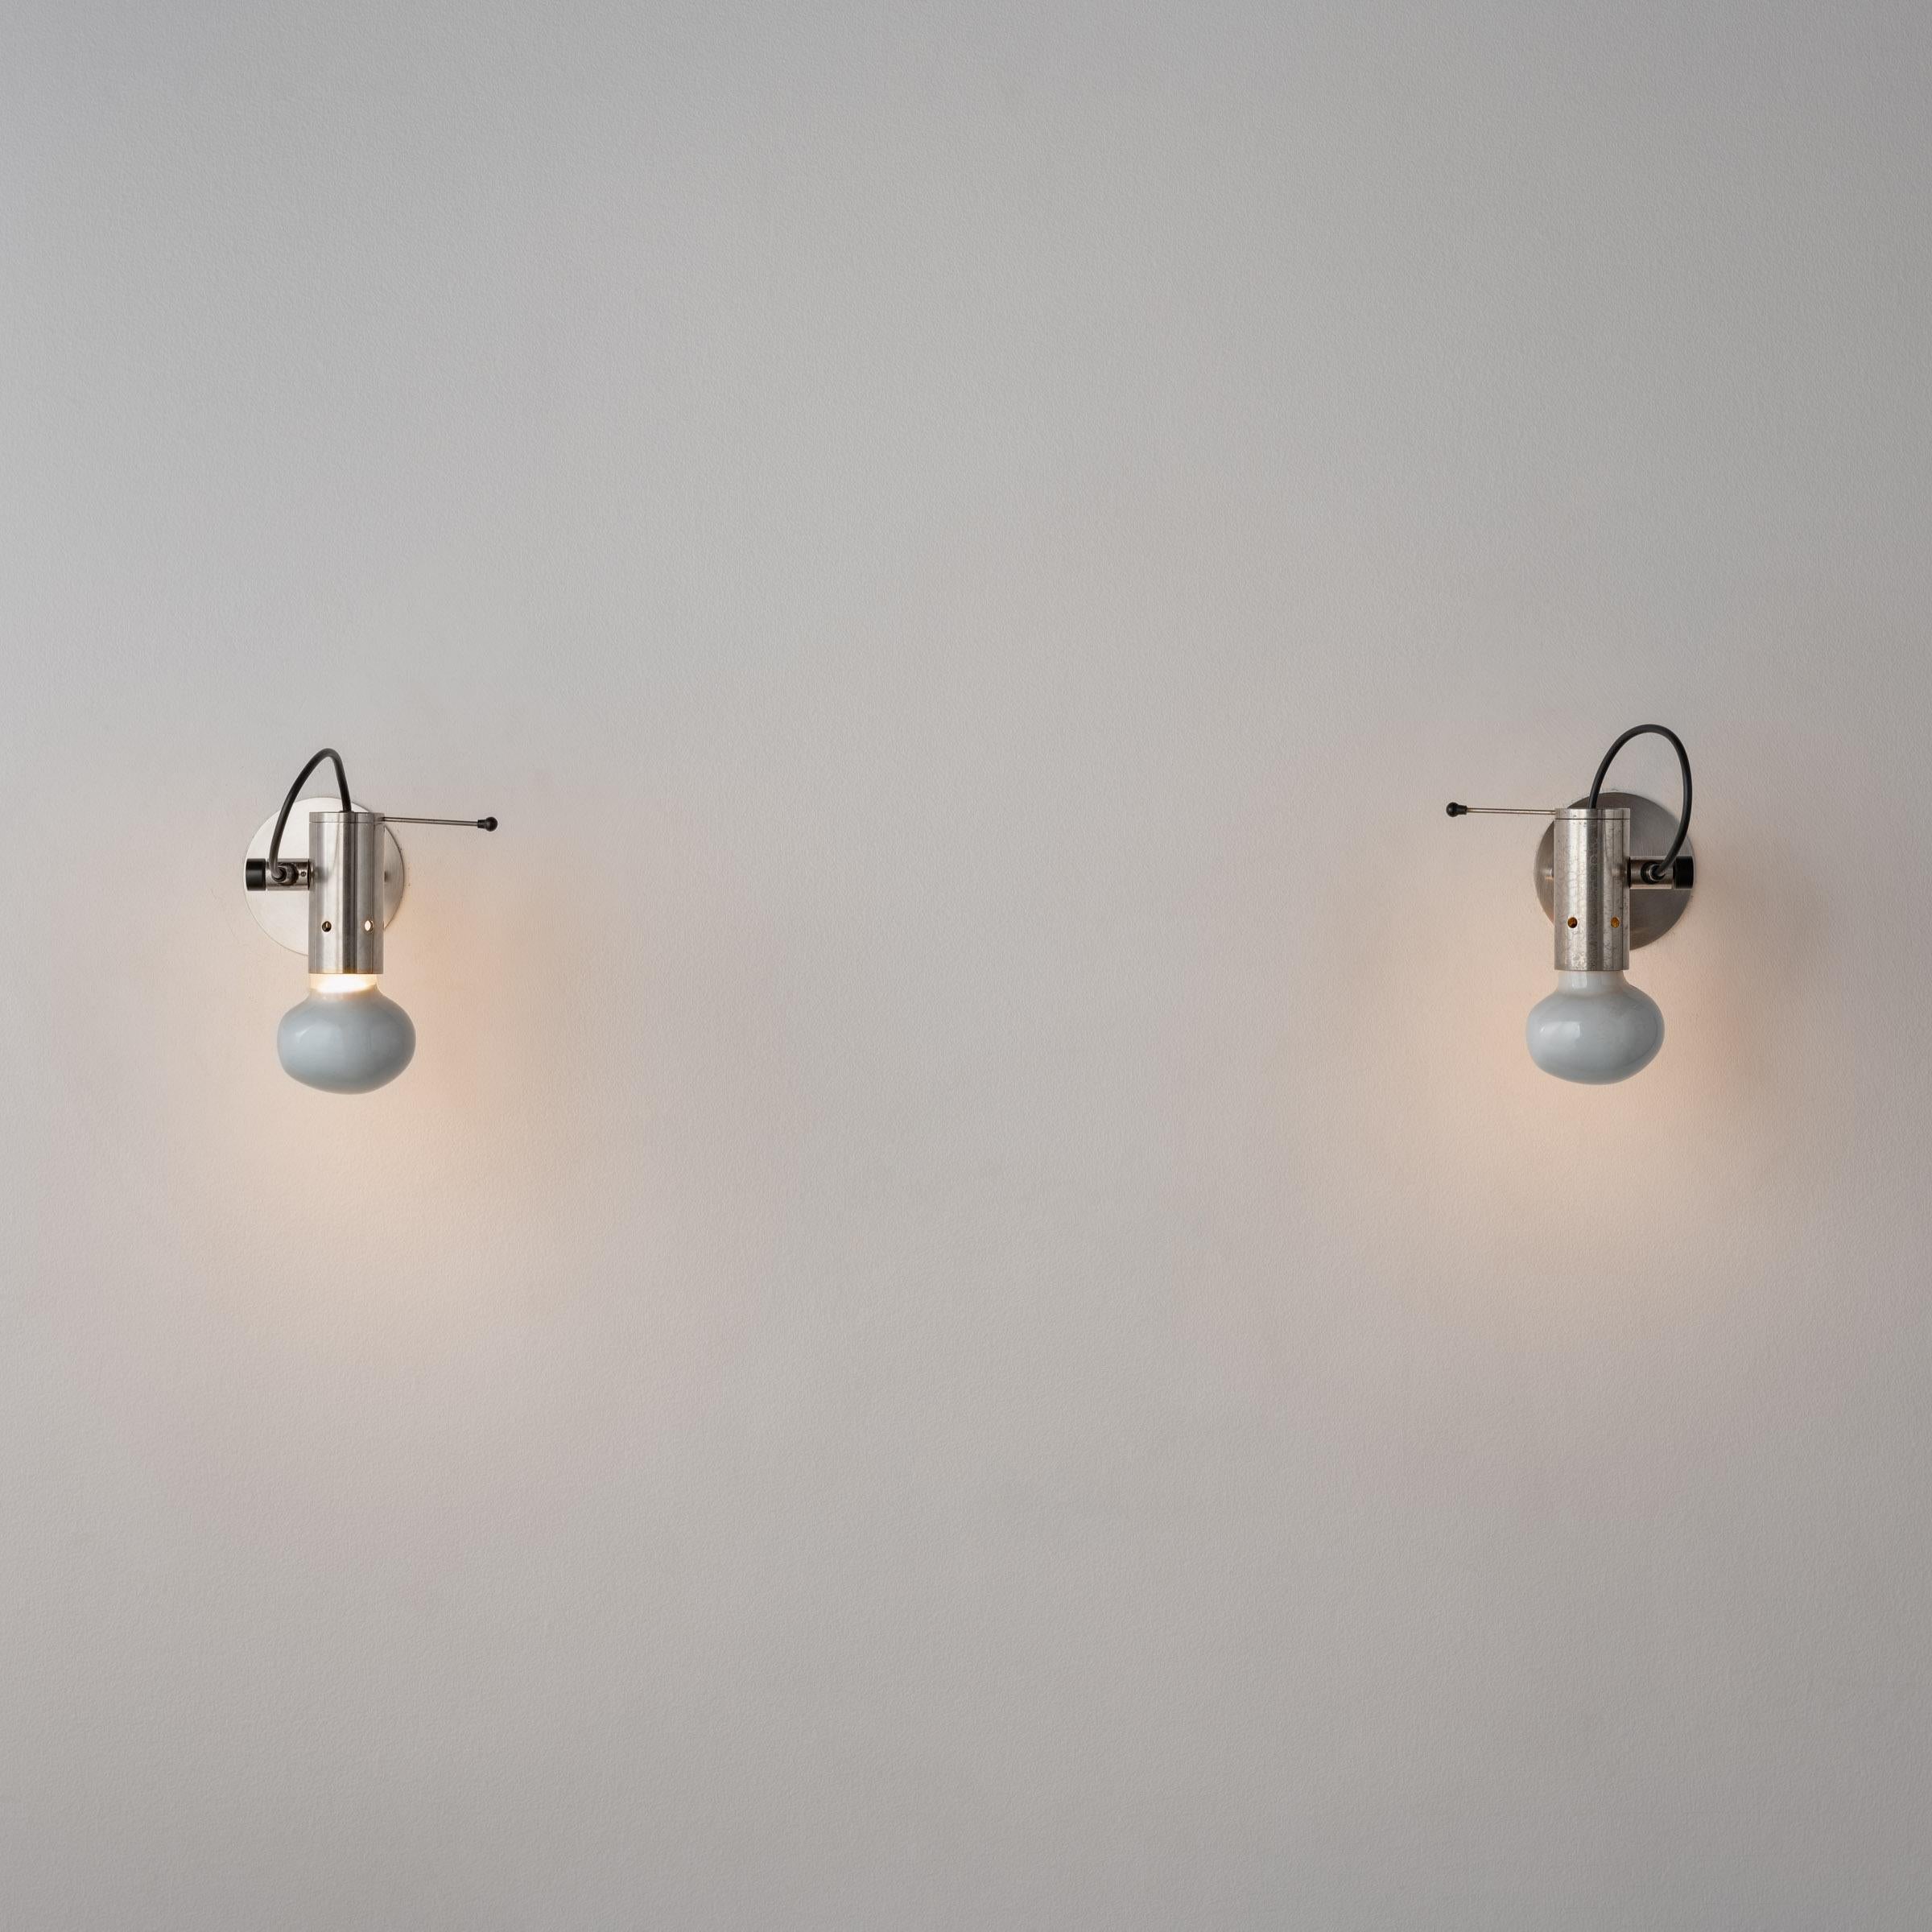 Mid-Century Modern Pair of Sconces by: Tito Agnoli for Oluce